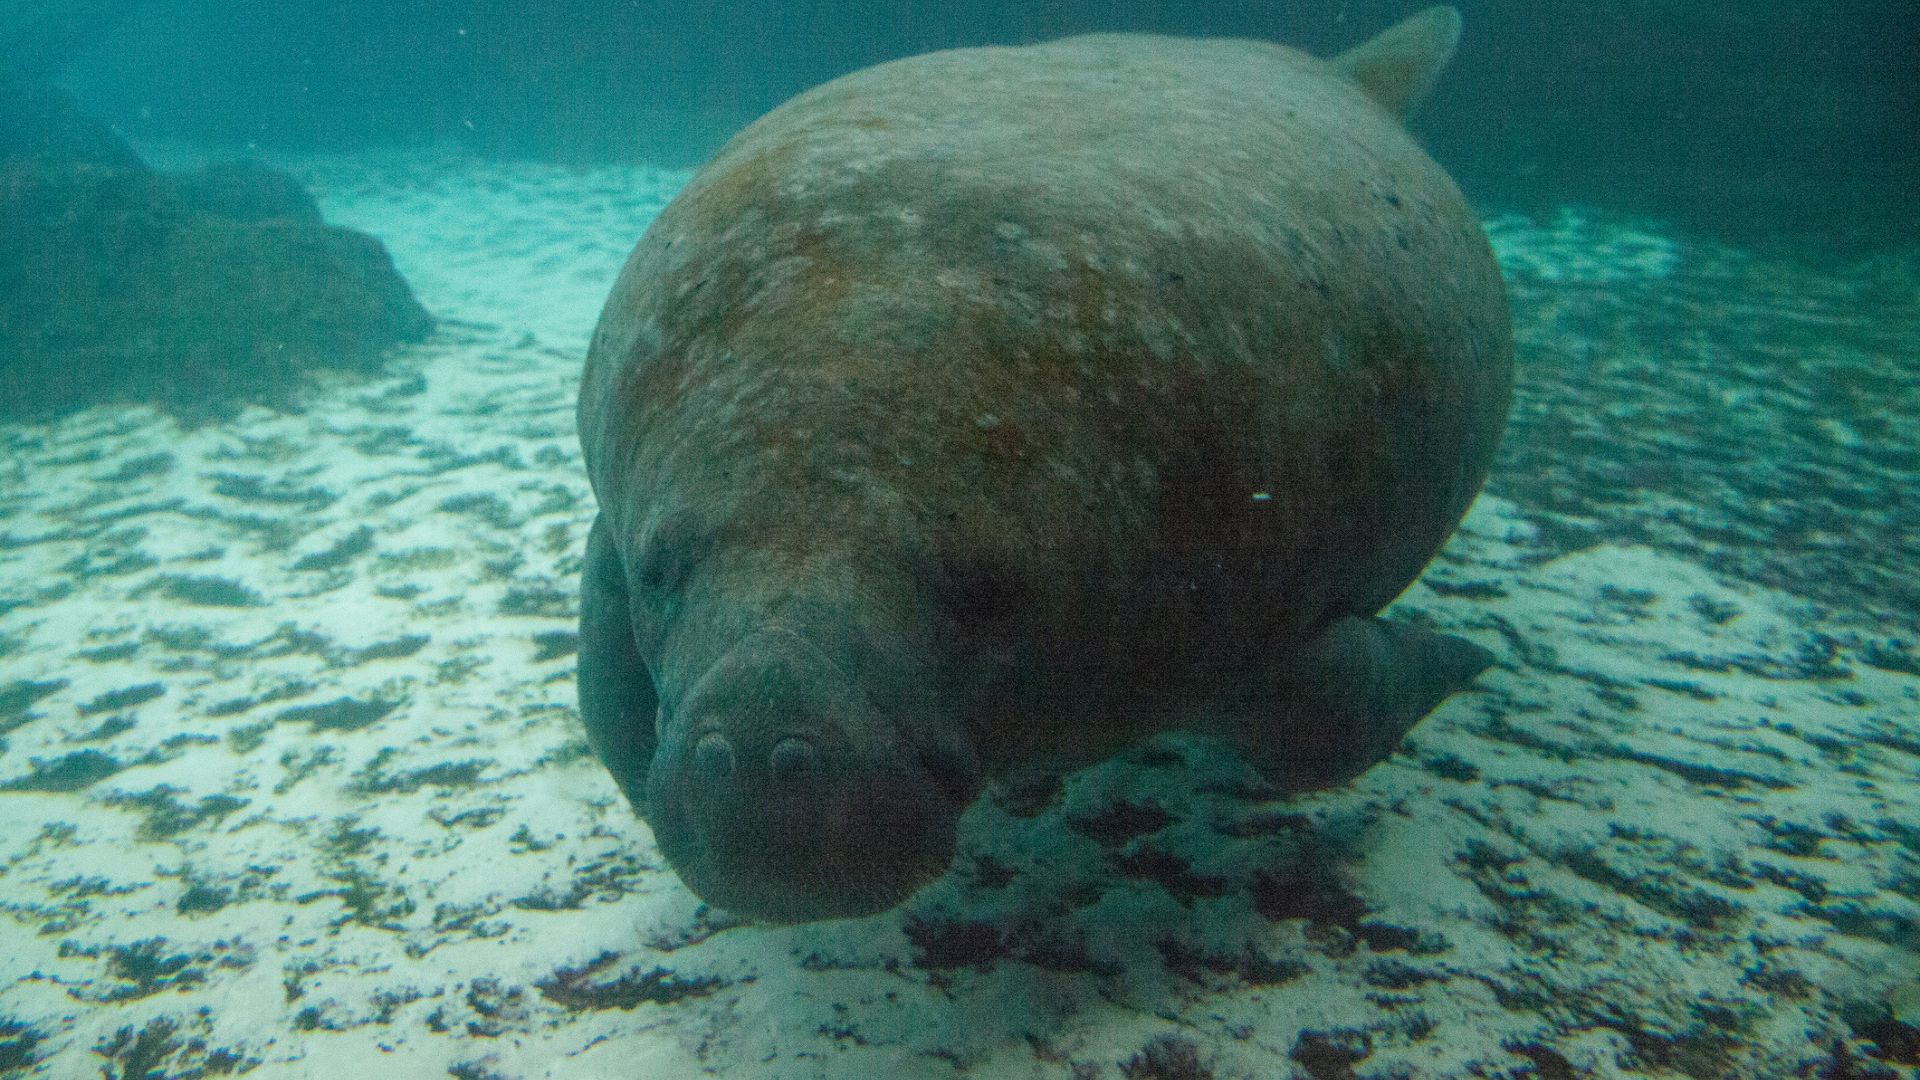 Florida manatees adapted to warm water via artificial plant at risk [Video]